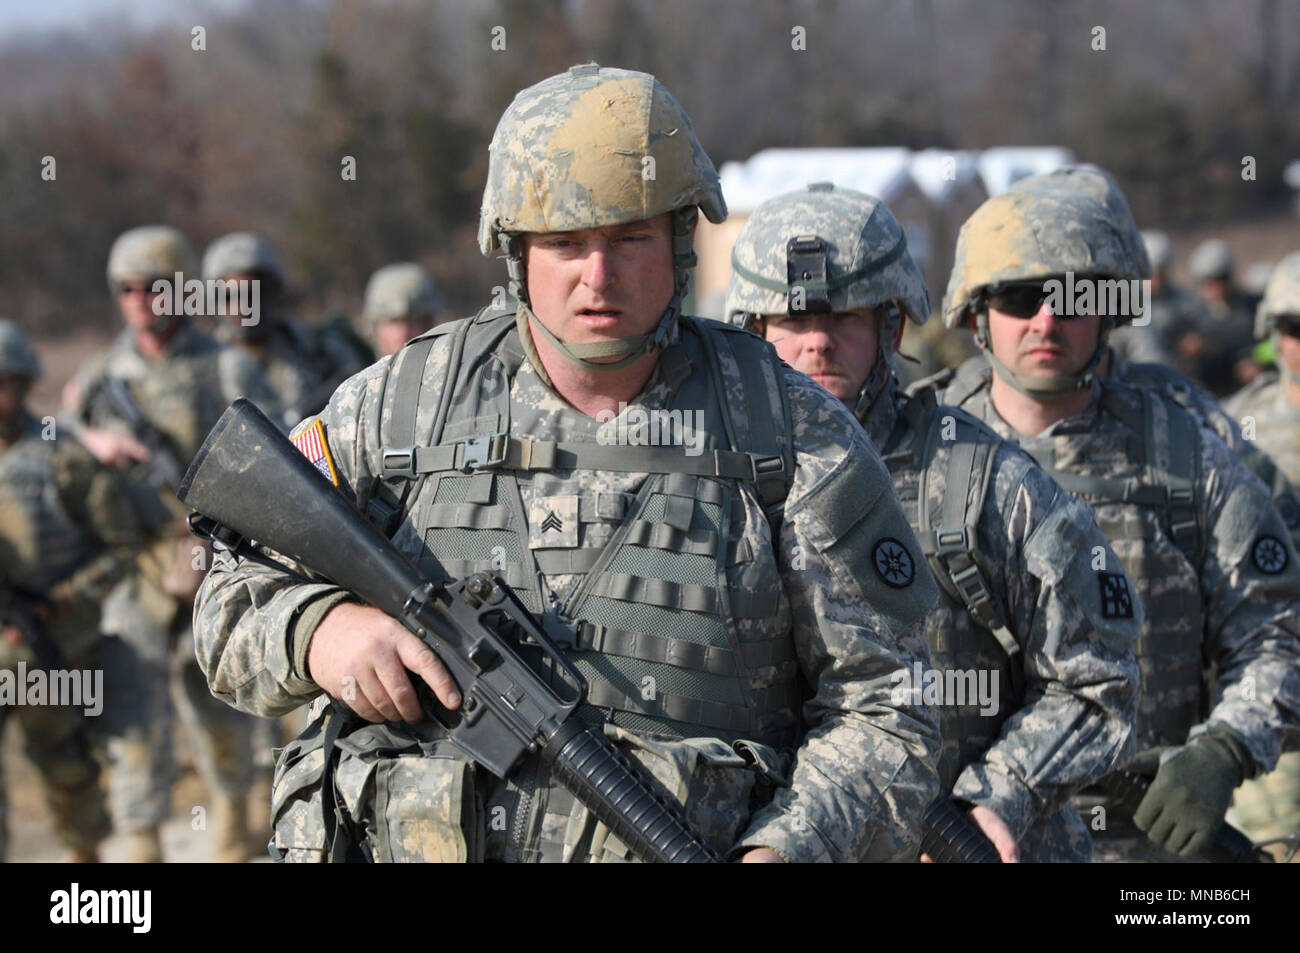 U.S. Army Reserve Soldiers march during the Combat Support Training Exercise (CSTX) 78-18-03 at Fort Knox, Kentucky, March 15, 2018. CSTX 78-18-03 is a training exercise that ensures America's Army Reserve units and Soldiers are trained and ready to deploy on short-notice and bring capable, combat-ready and lethal firepower in support of the Army and our joint partners anywhere in the world.  (U.S. Army Reserve Stock Photo